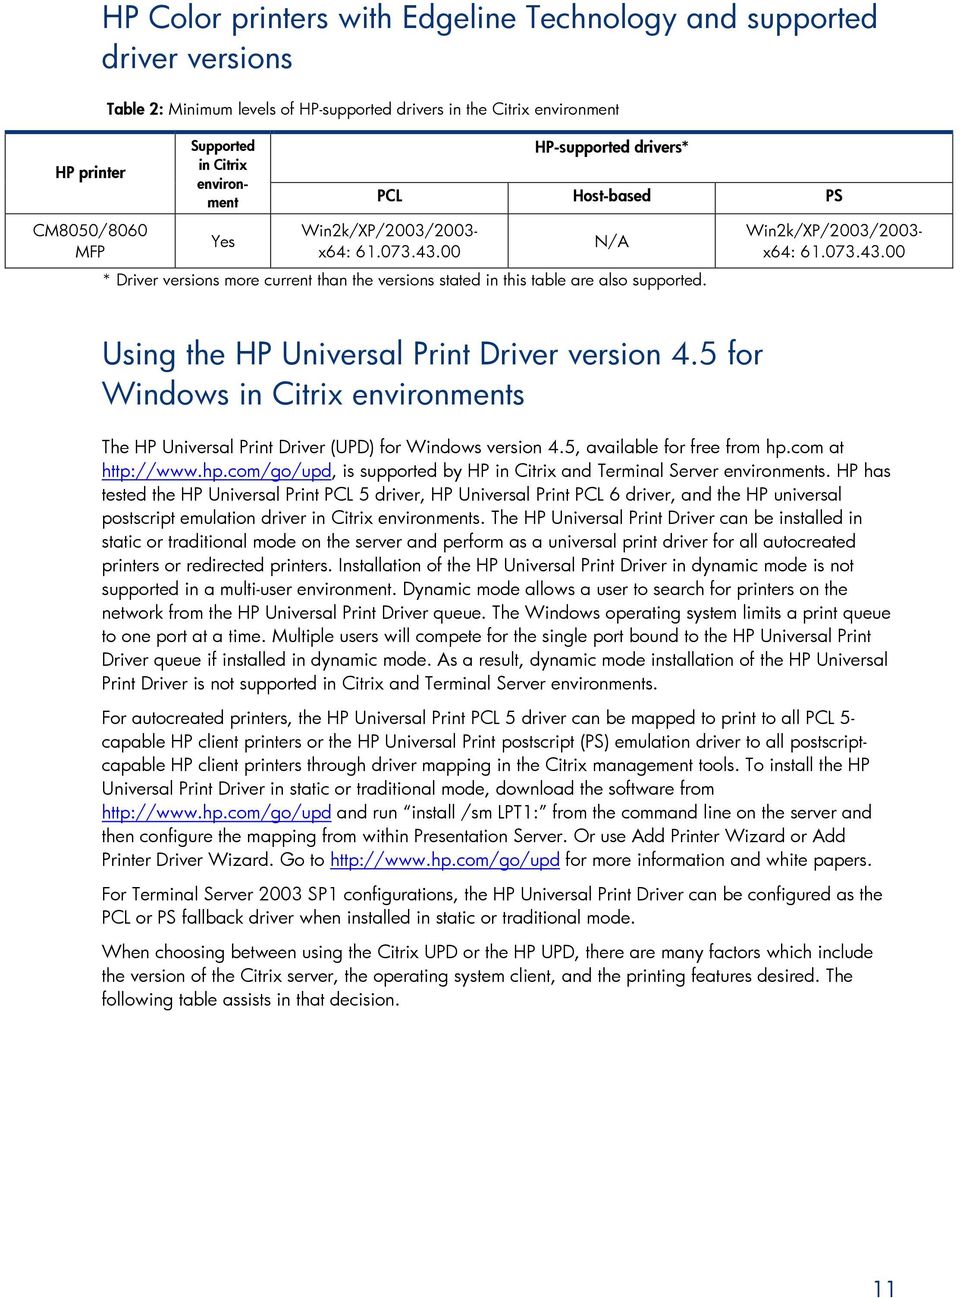 5 for Windows in Citrix environments The HP Universal Print Driver (UPD) for Windows version 4.5, available for free from hp.com at http://www.hp.com/go/upd, is supported by HP in Citrix and Terminal Server environments.